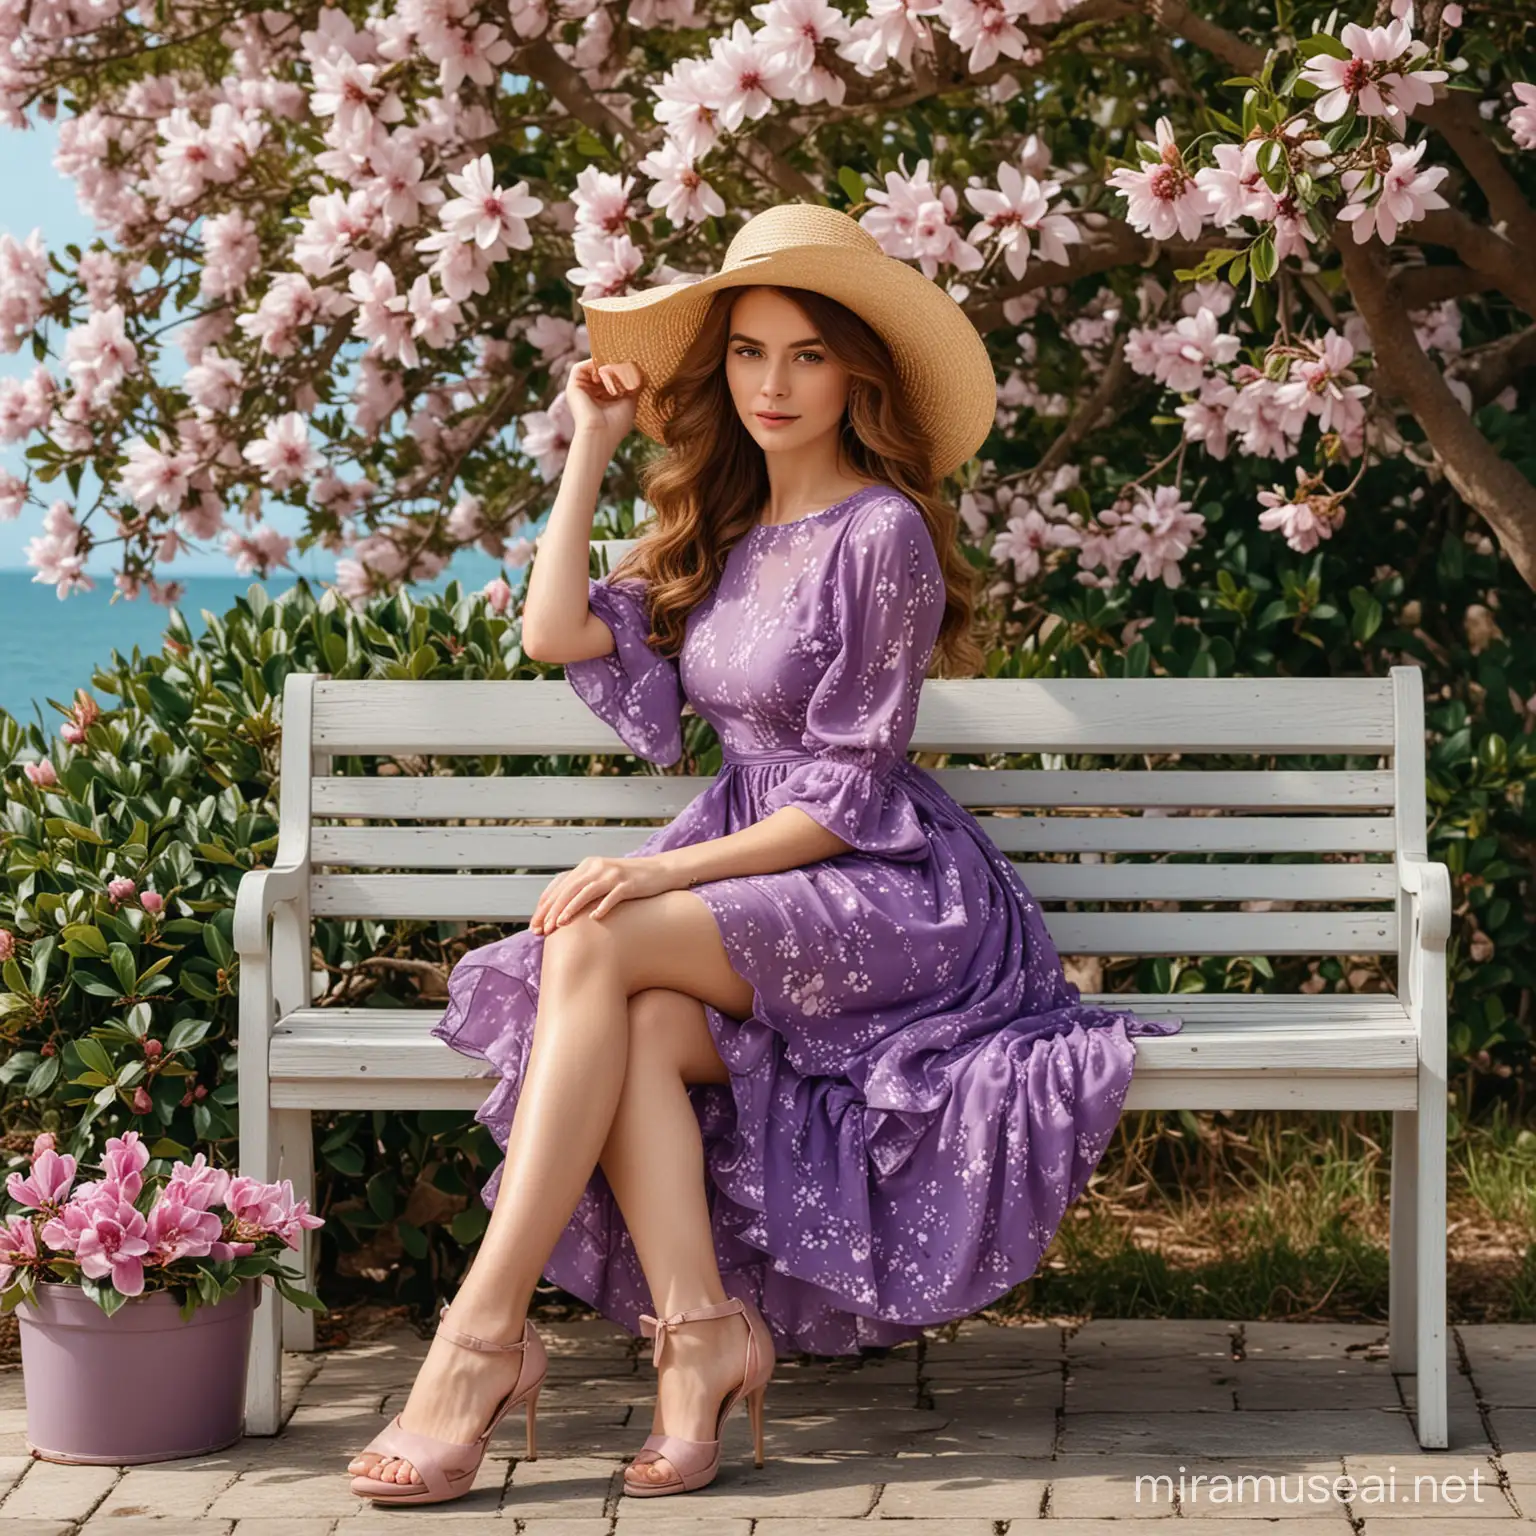 Elegant Girl with Chestnut Hair Relaxing by Blooming Magnolia Bush